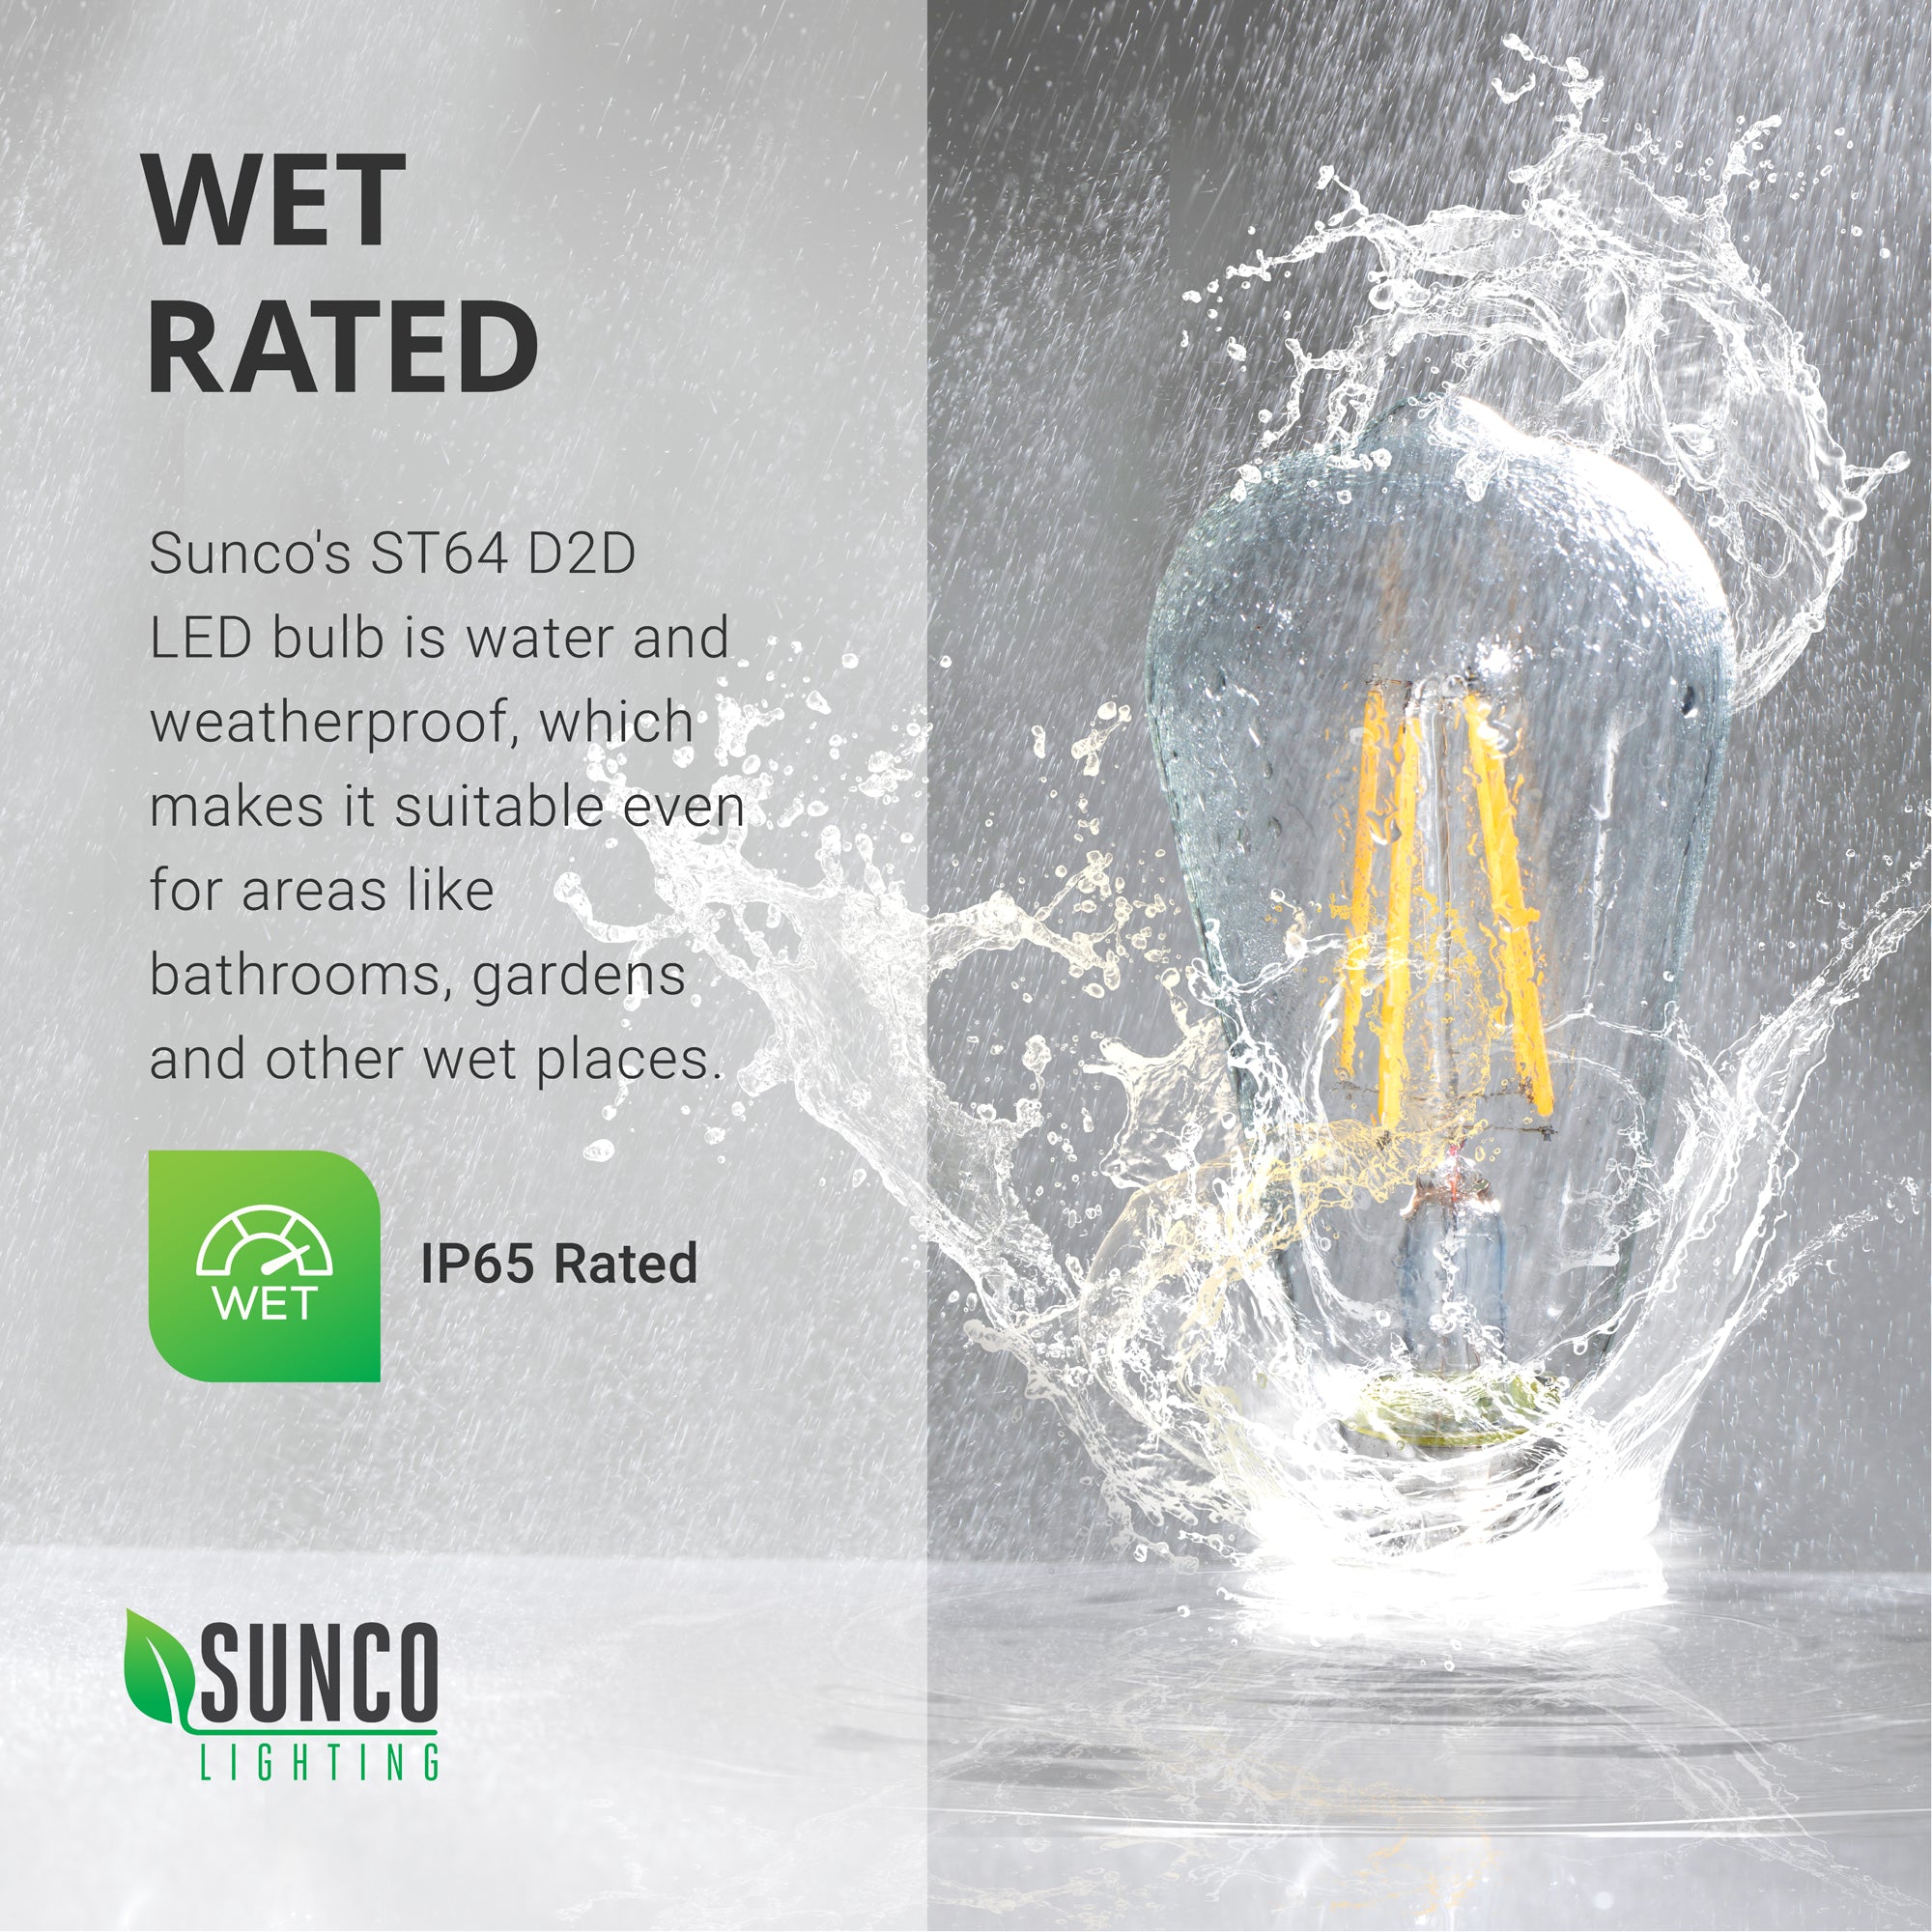 IP65 rating. Sunco's vintage looking ST64 LED Bulbs are wet rated, making them perfect bulbs for your outdoor areas, bathrooms, and kitchens. Image shows an ST64 LED with Dusk to Dawn being splashed by rain. The dust-tight construction provides you with reliable light in inclement weather. Use this light bulb in open fixtures like the glass paned porch lantern shown here.